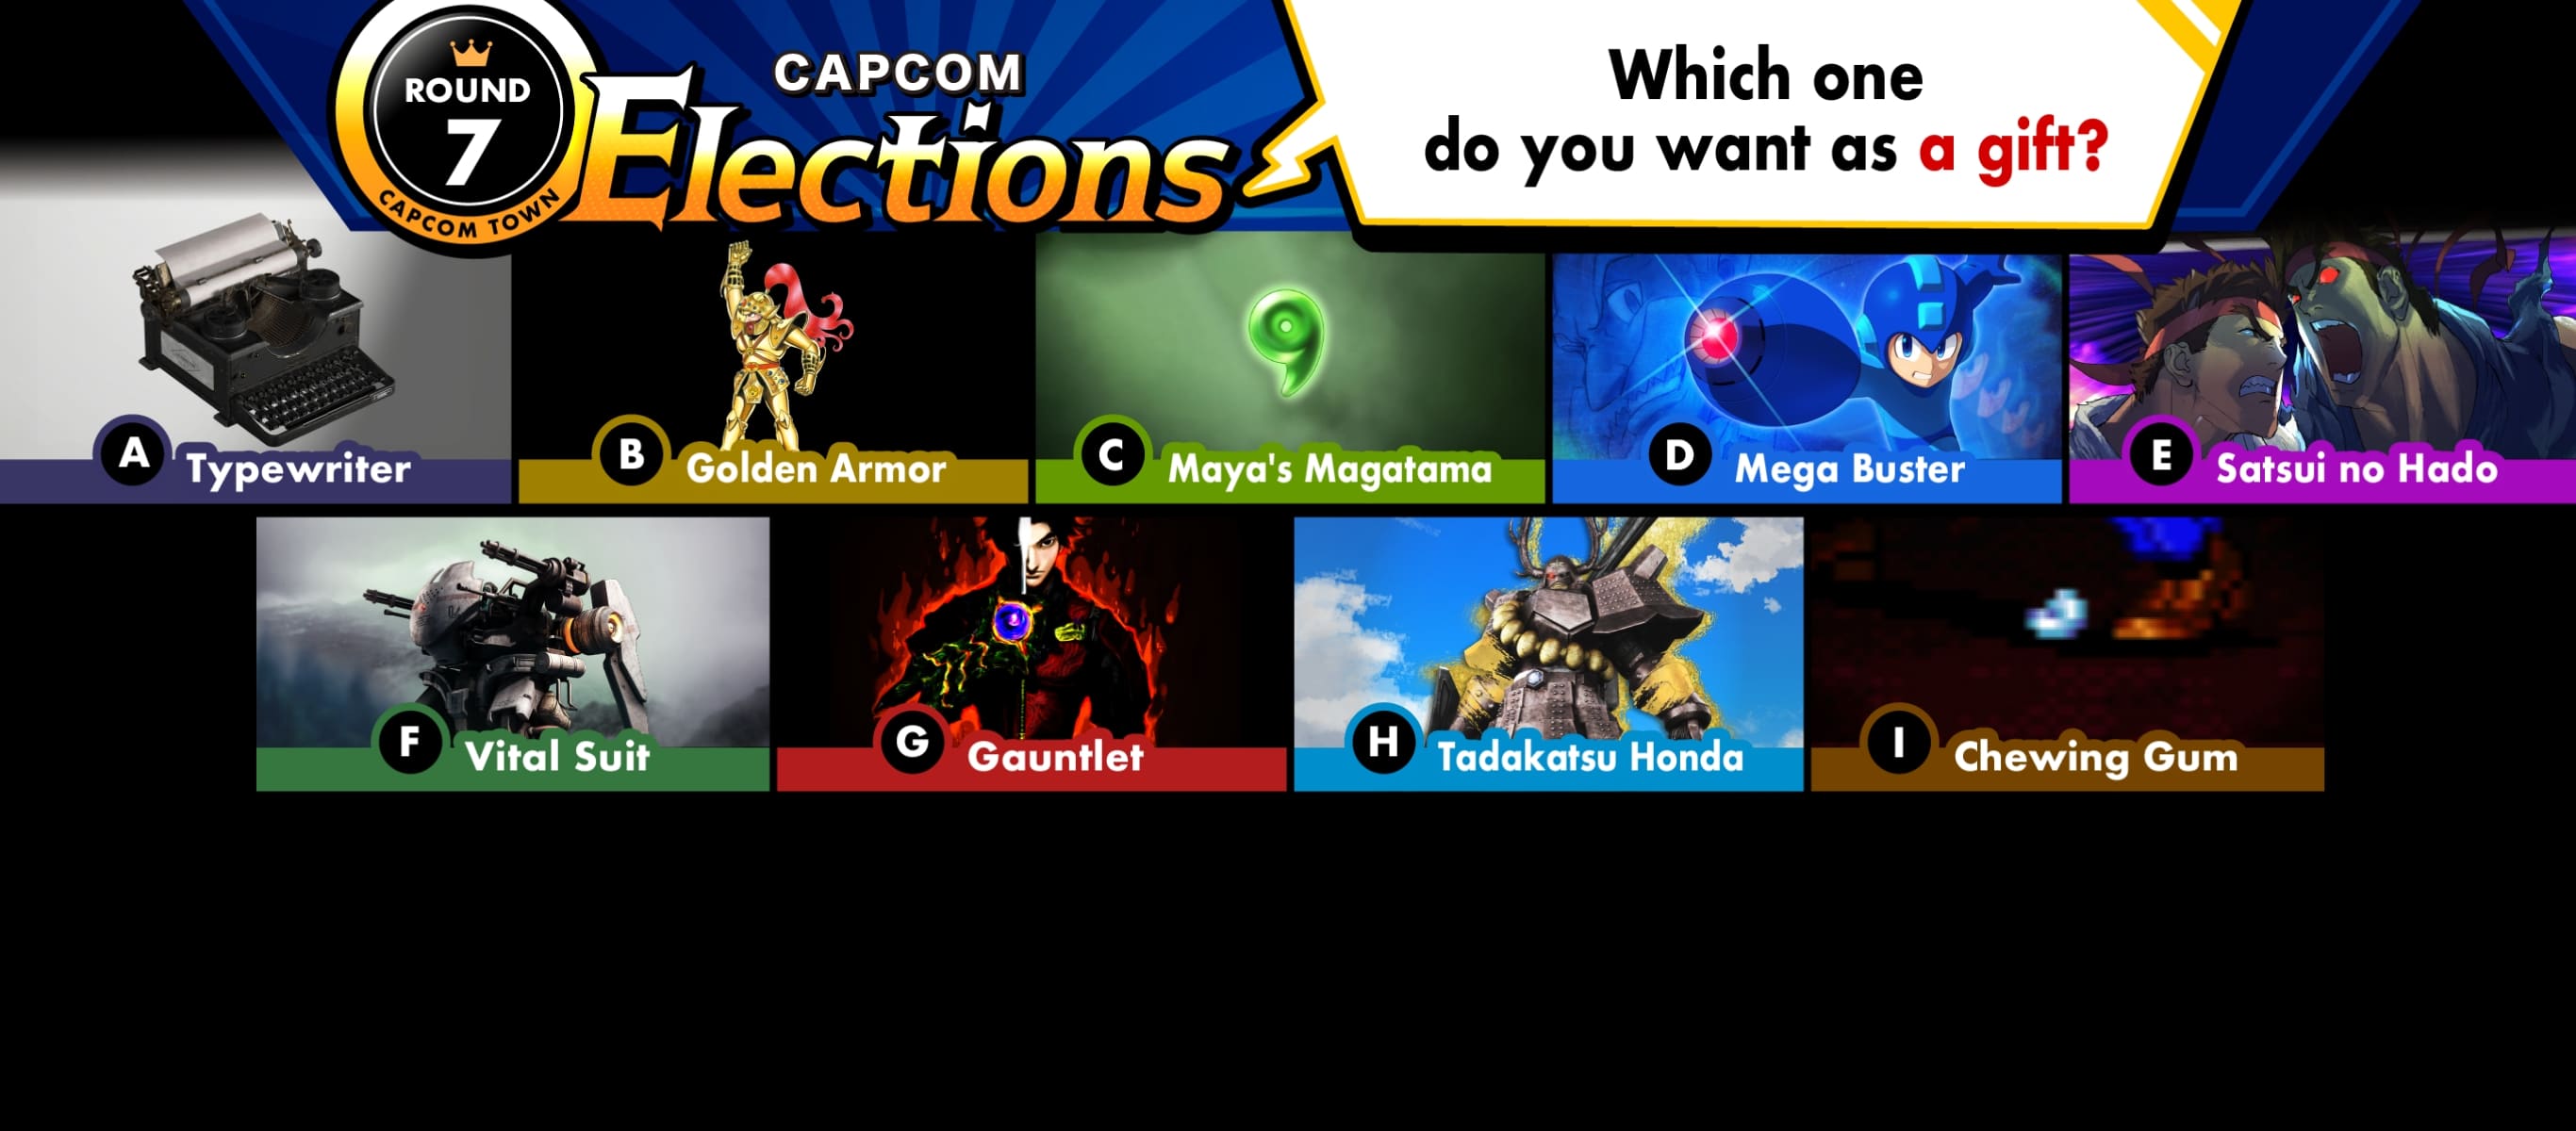 Capcom Elections: Round 7 Which one would you want as a gift?